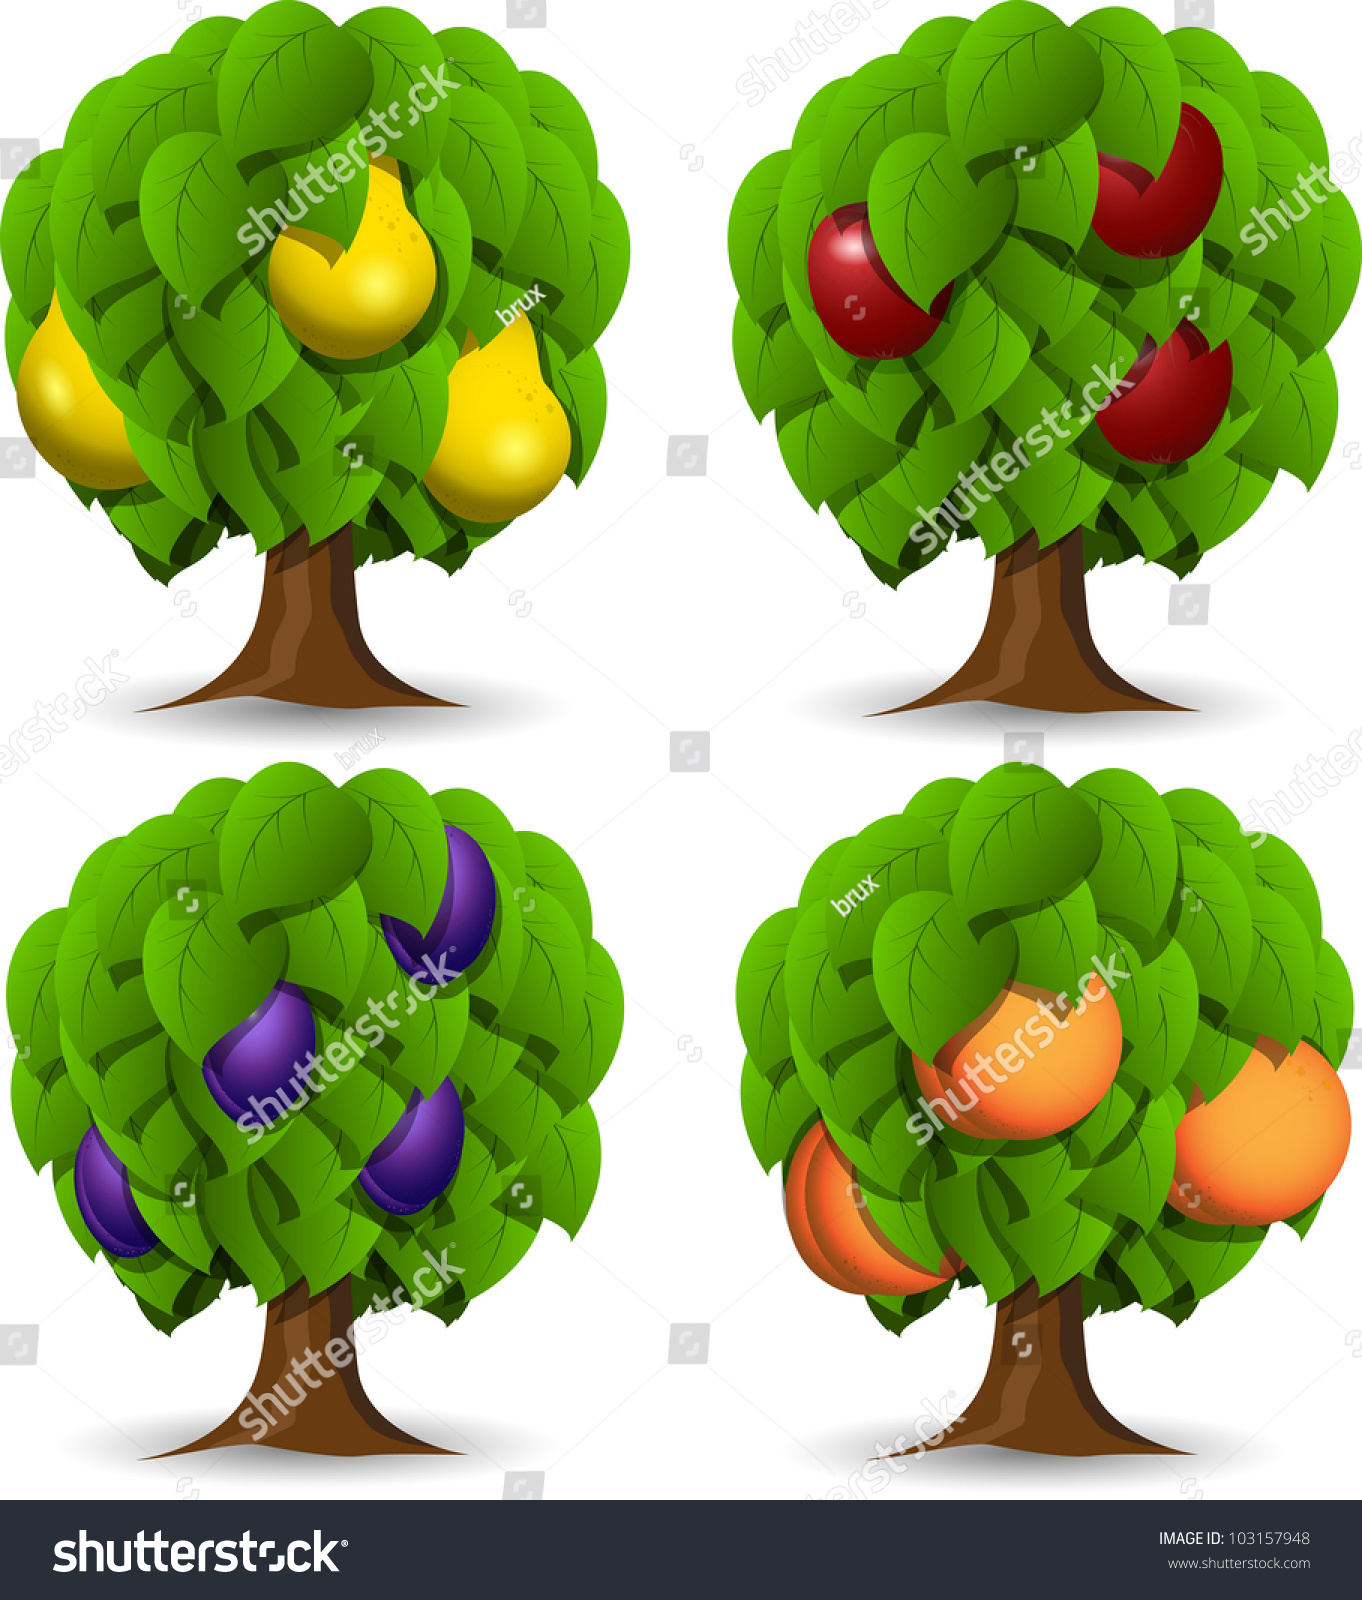 clipart of different fruits - photo #39